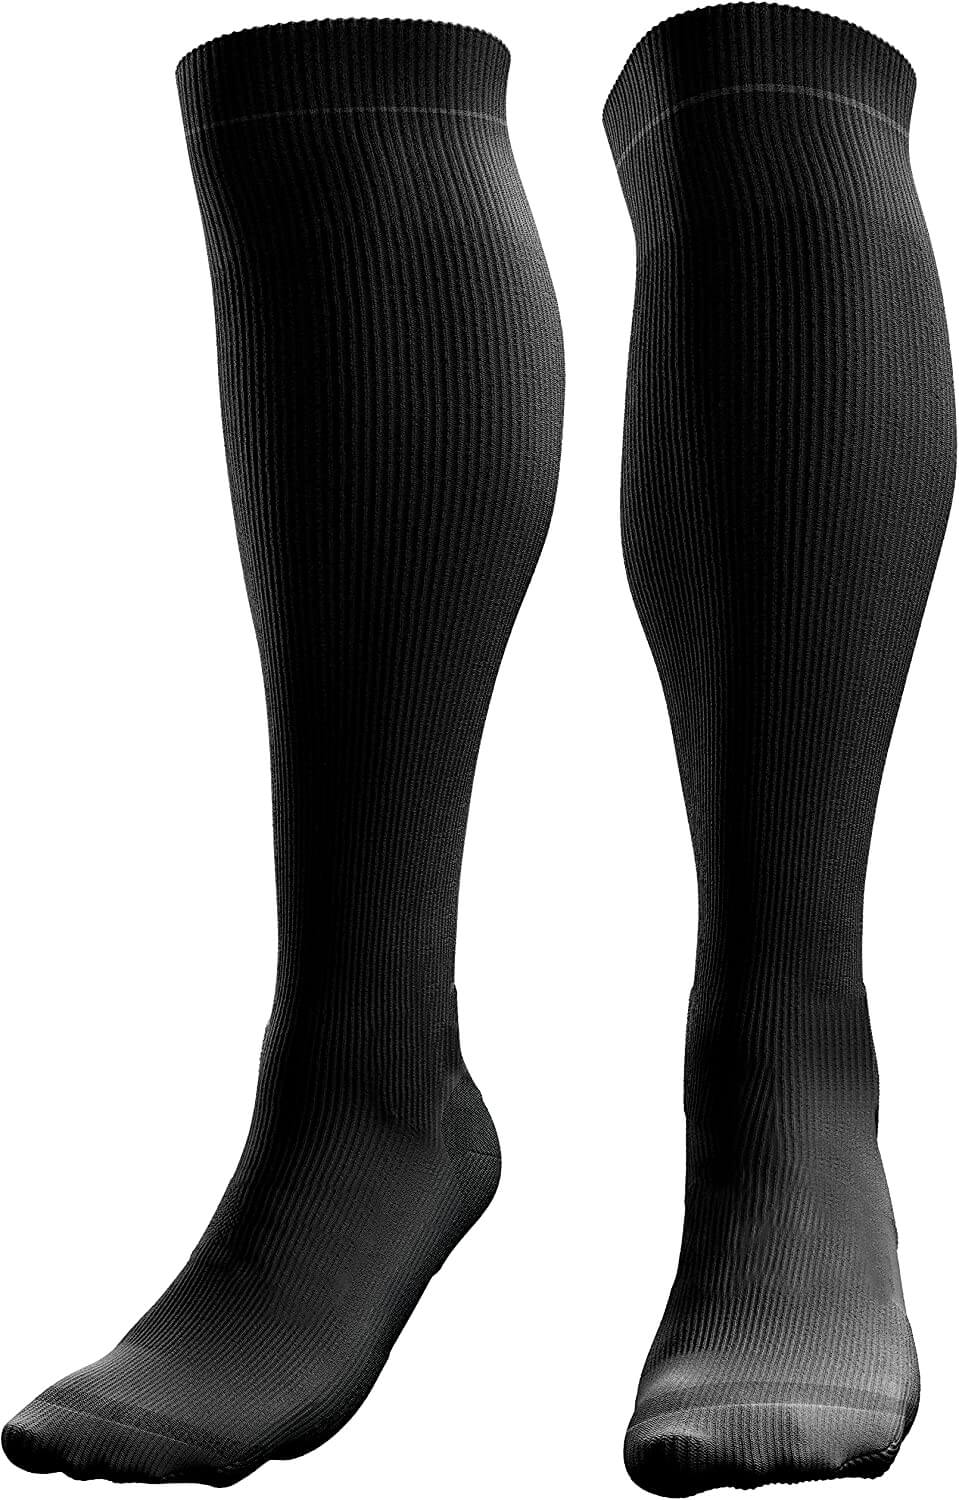 Why do we use Compression socks for sport